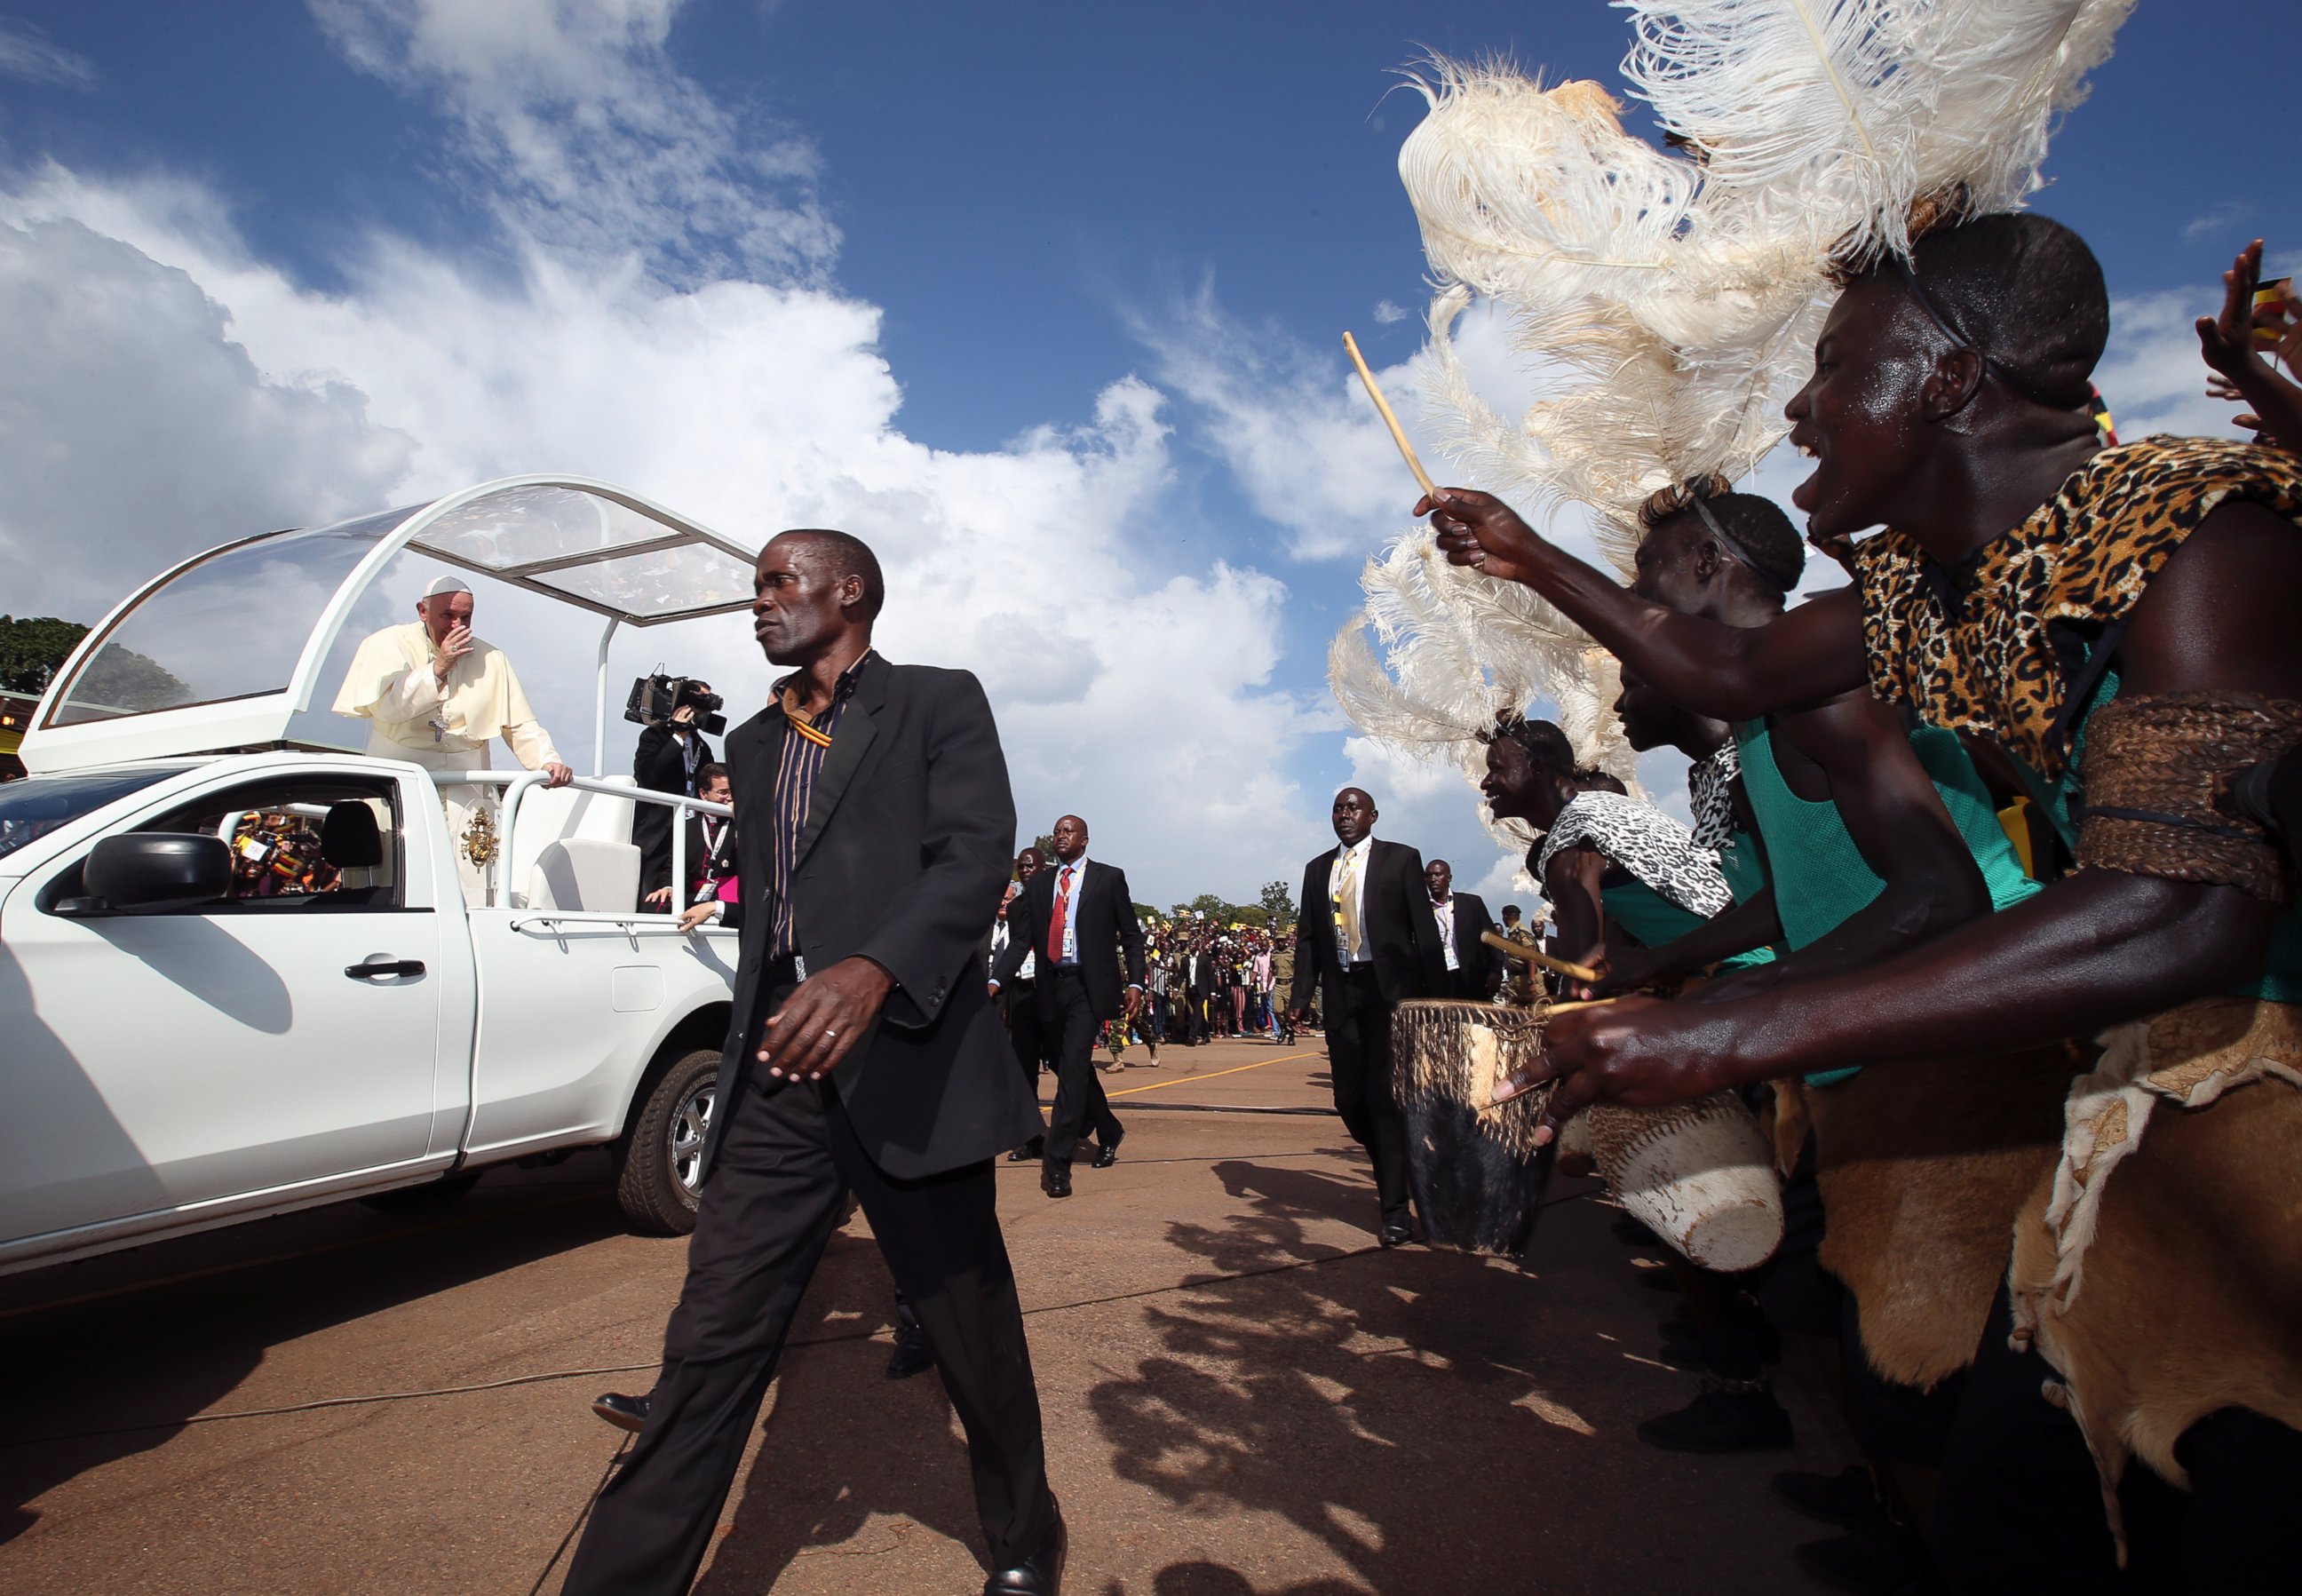 PHOTO: Pope Francis waves from the popemobile to meet with youths in Kampala, Uganda, on Nov. 28, 2015.